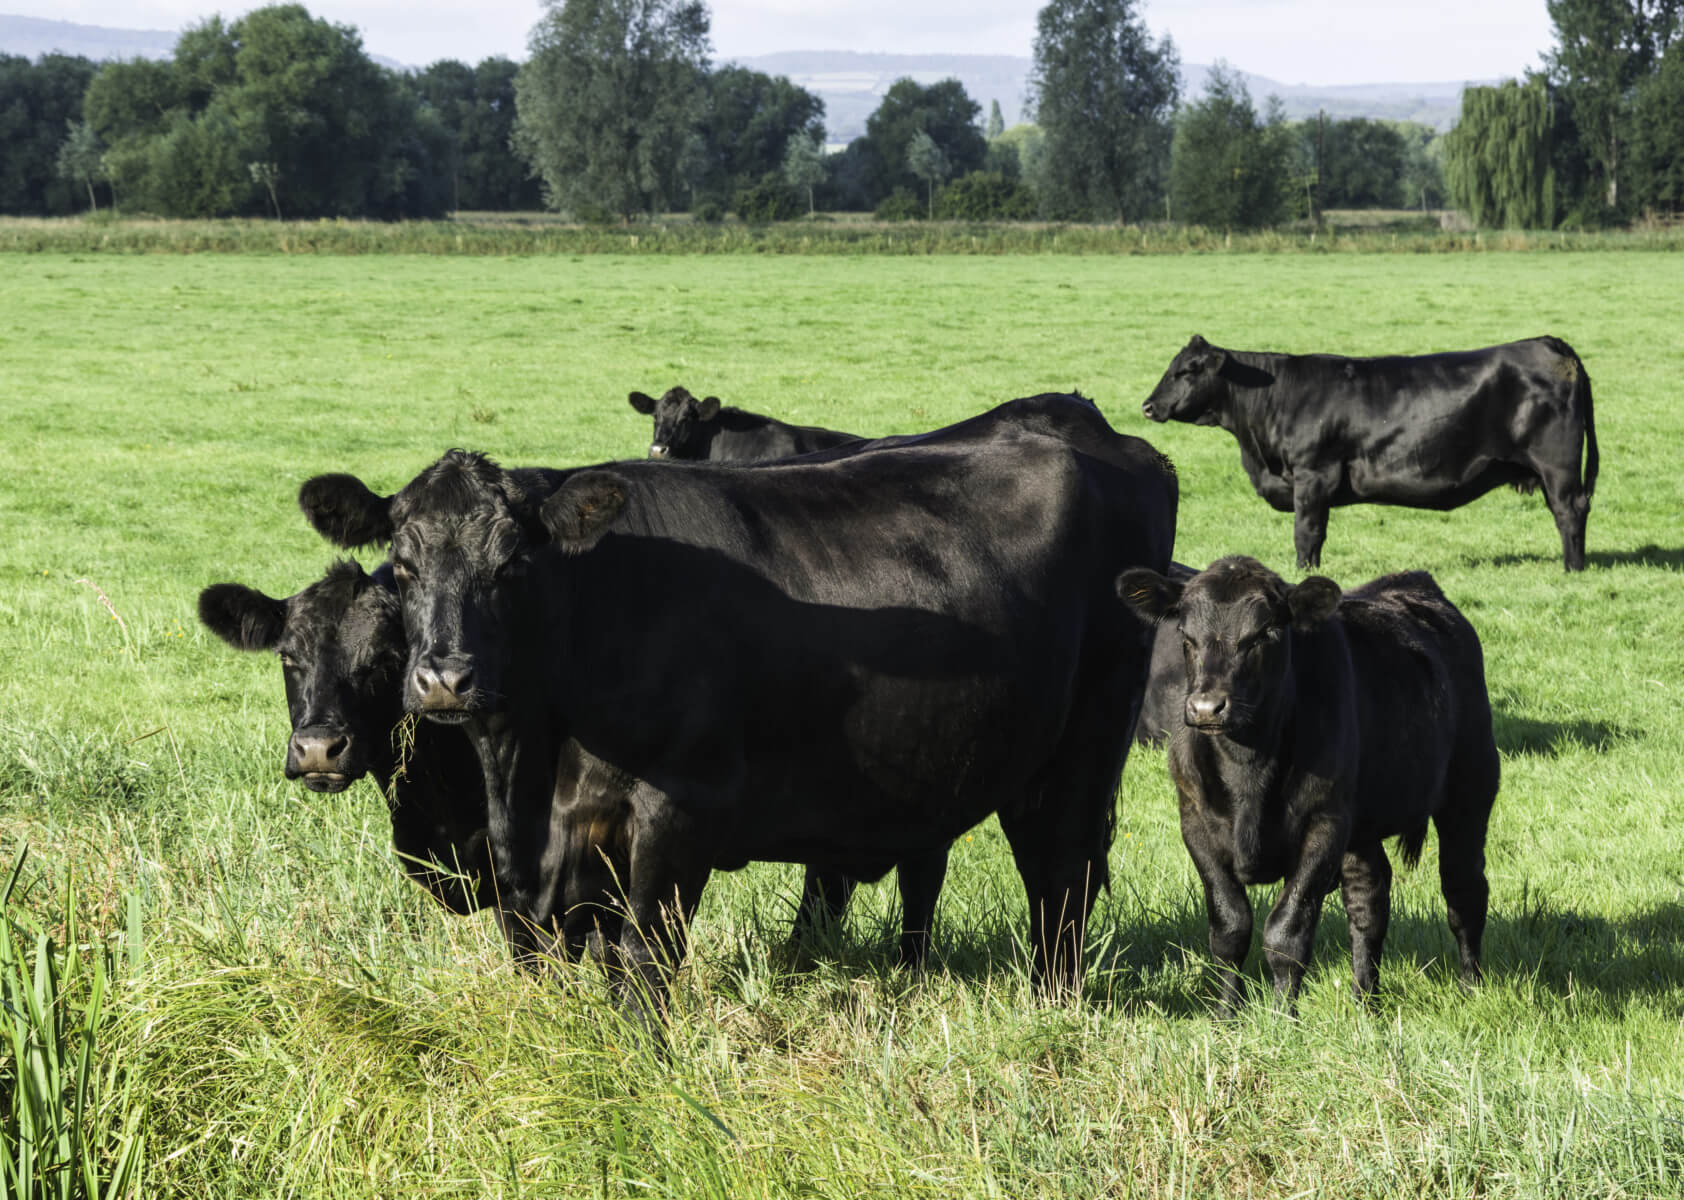 While specialty beef that is grass-fed, pasture-raised or organic also commands higher prices, Fluharty explained that marketing is key to success.